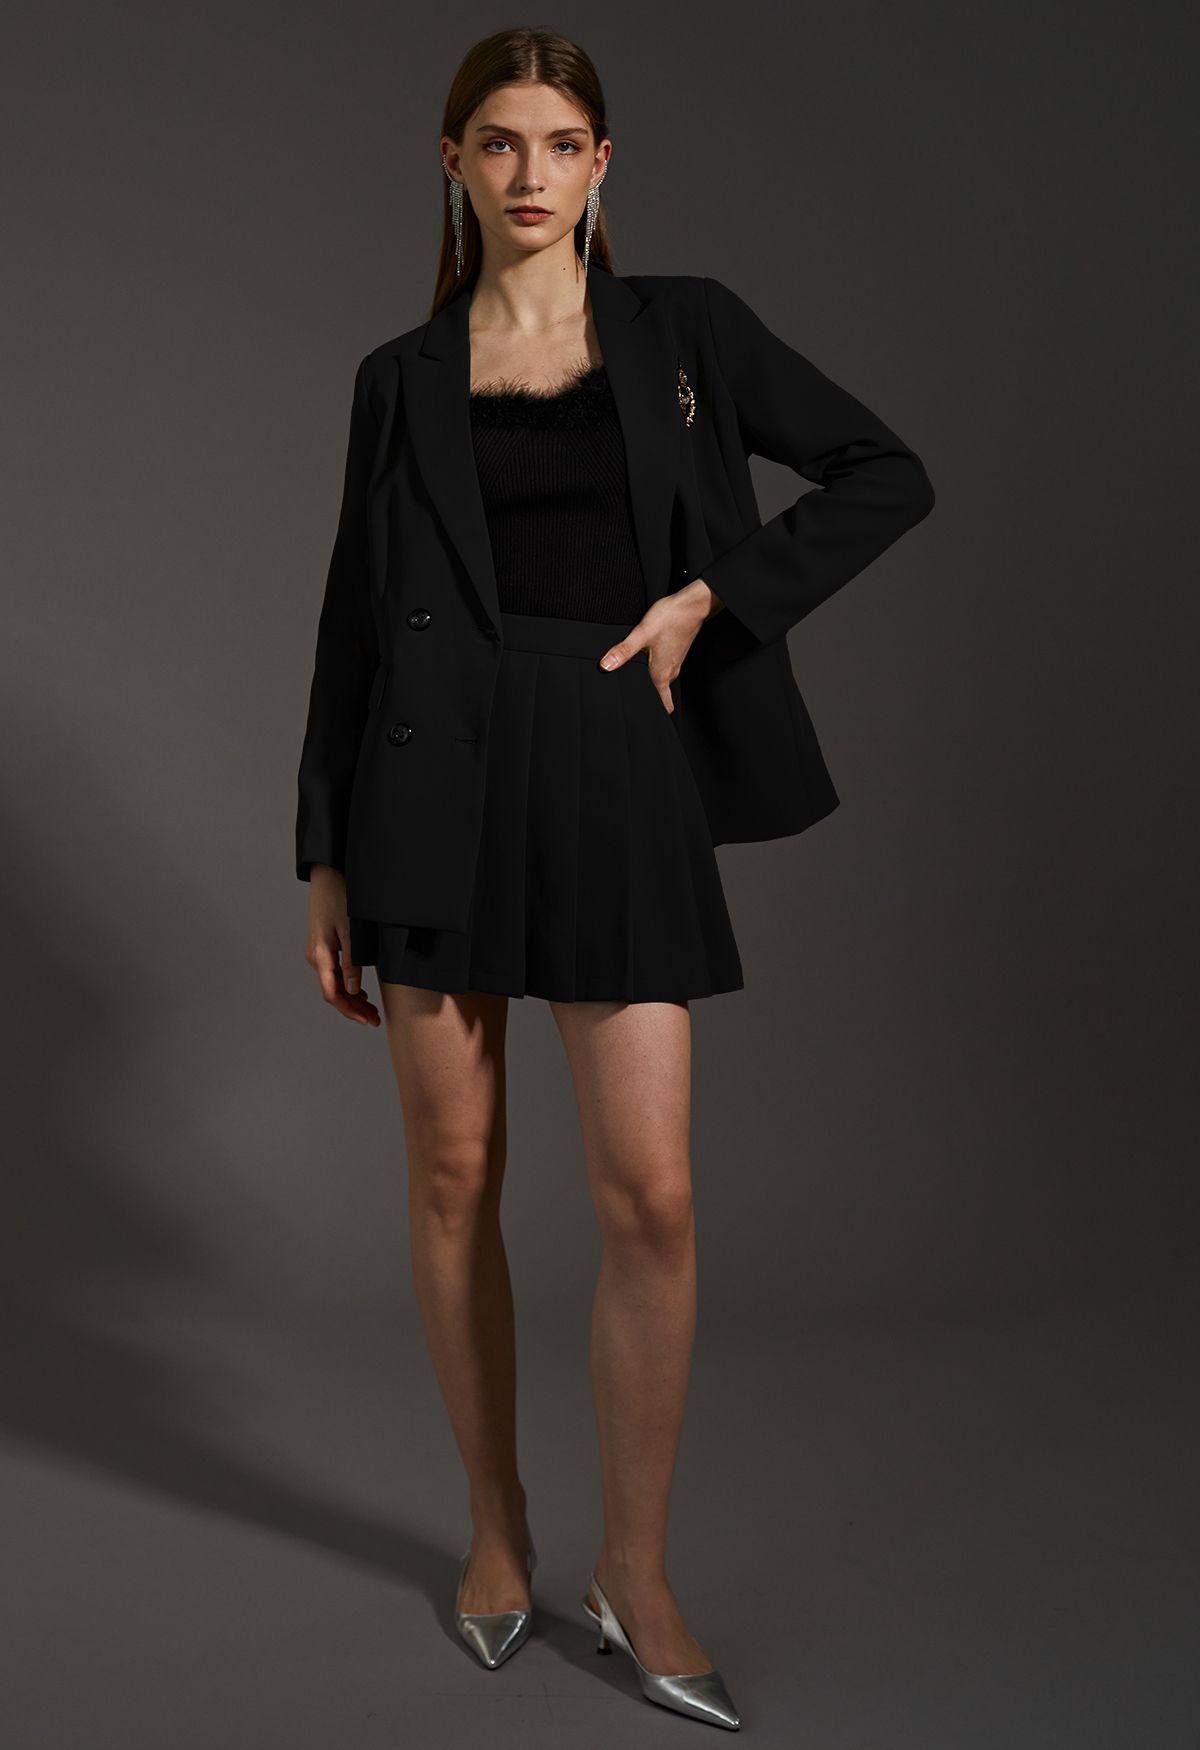 Bee Badge Solid Color Blazer and Skirt Set in Black